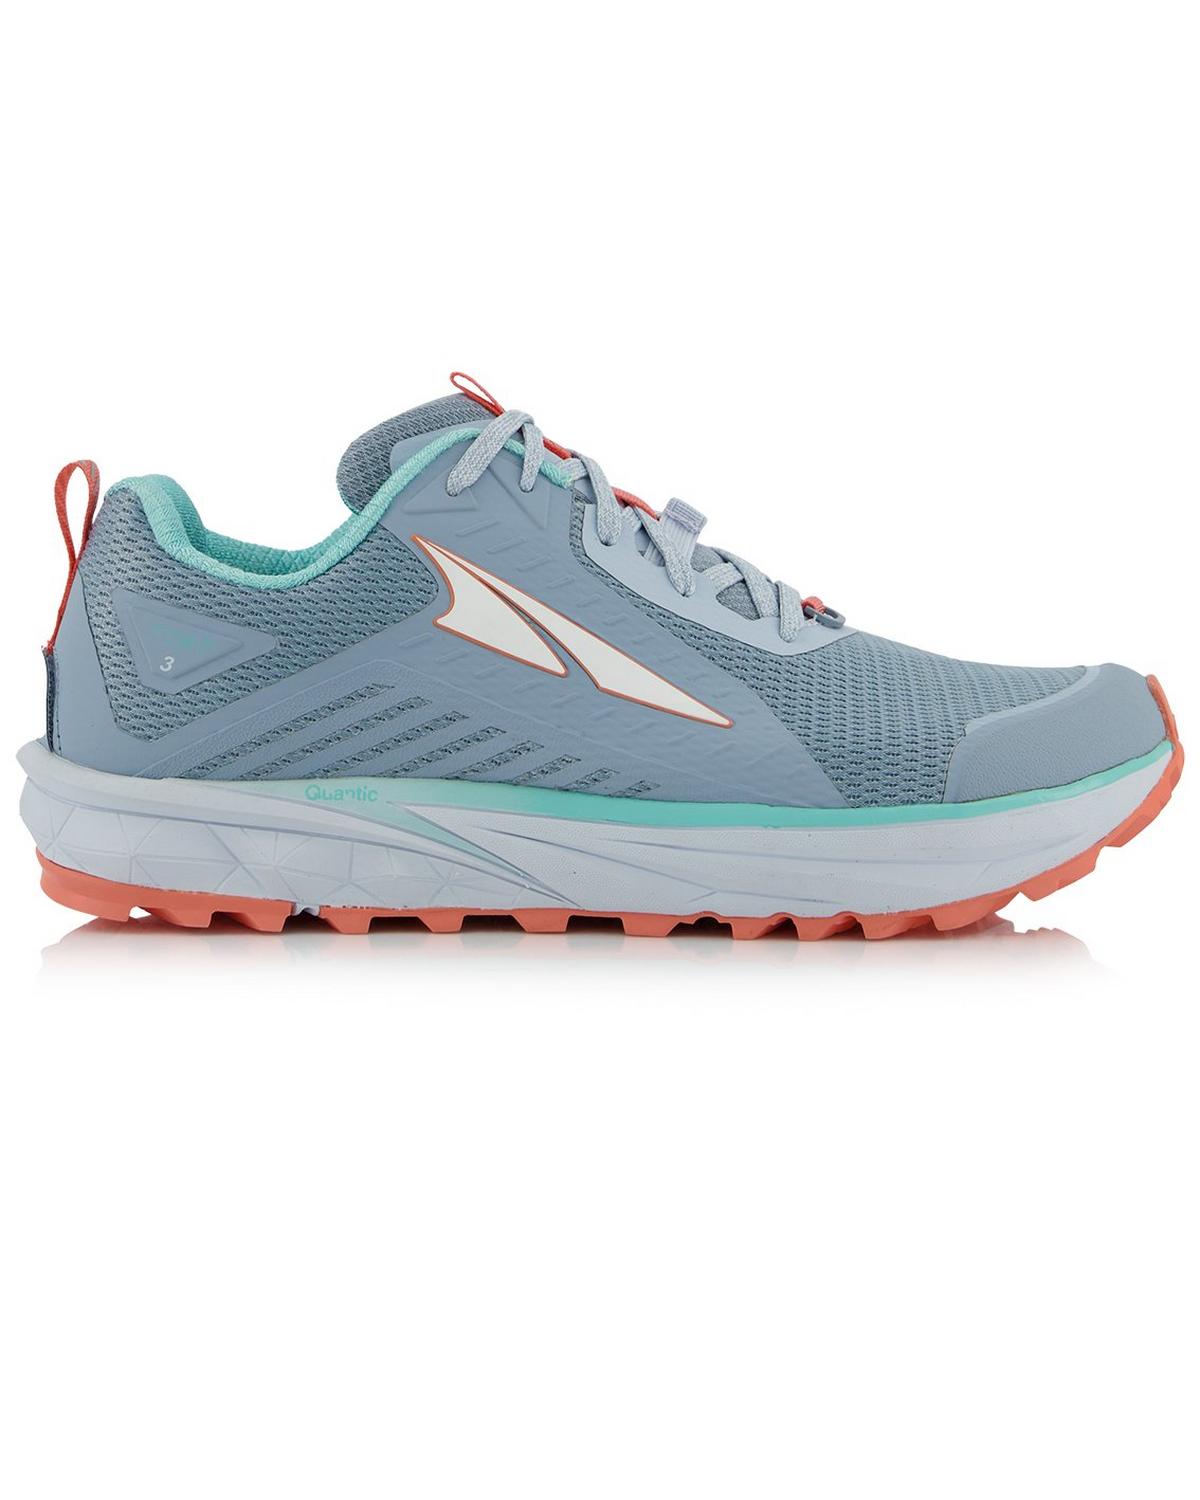 Altra Women’s Timp 3 Trail Running Shoes -  Grey